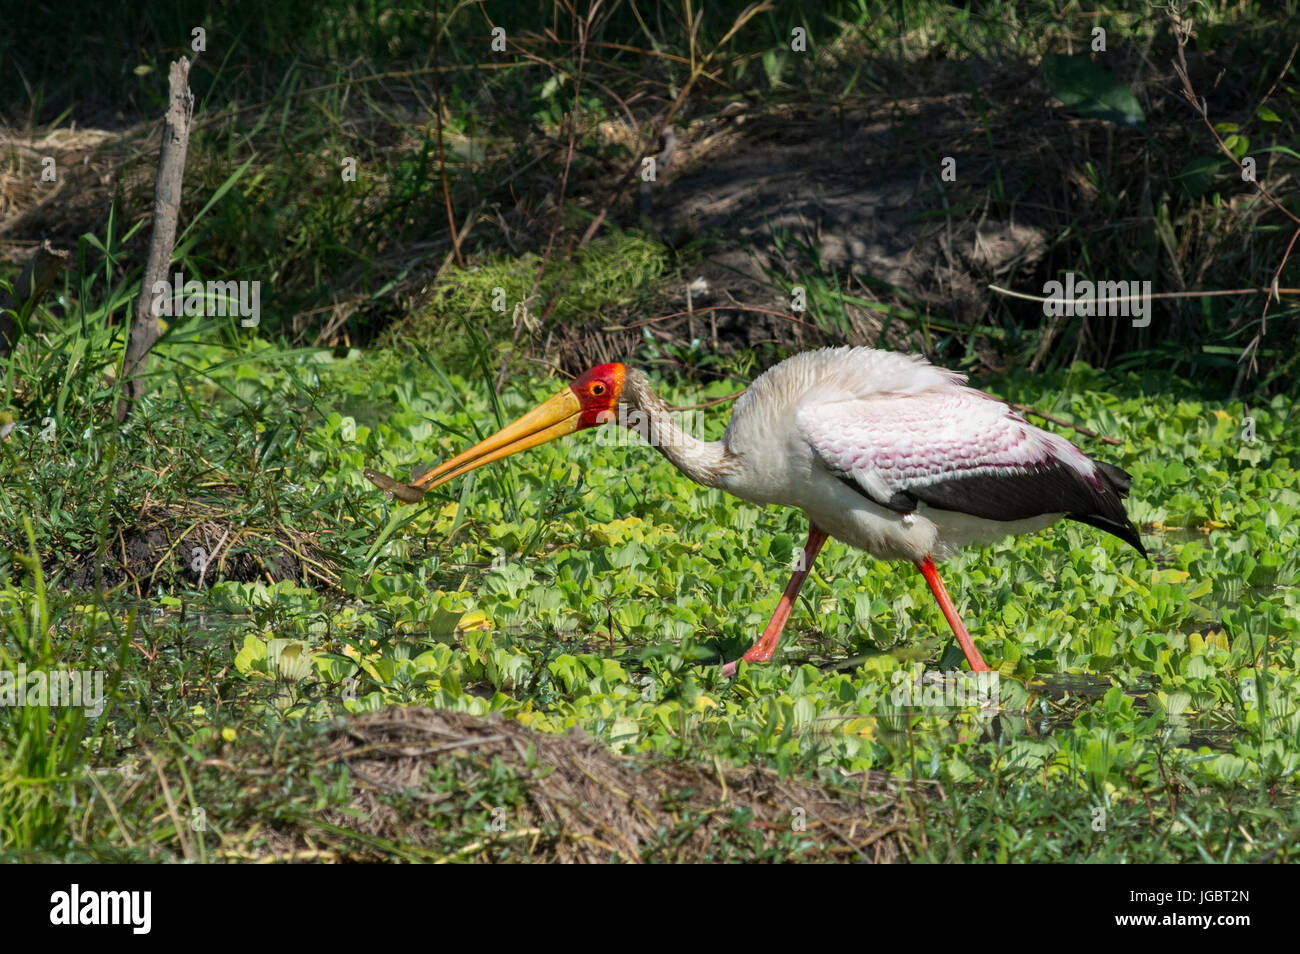 Zambia, South Luangwa National Park. Yellow-billed stork (WILD: Mycteria ibis), aka wood stork or wood ibis, large African wading stork species in the Stock Photo